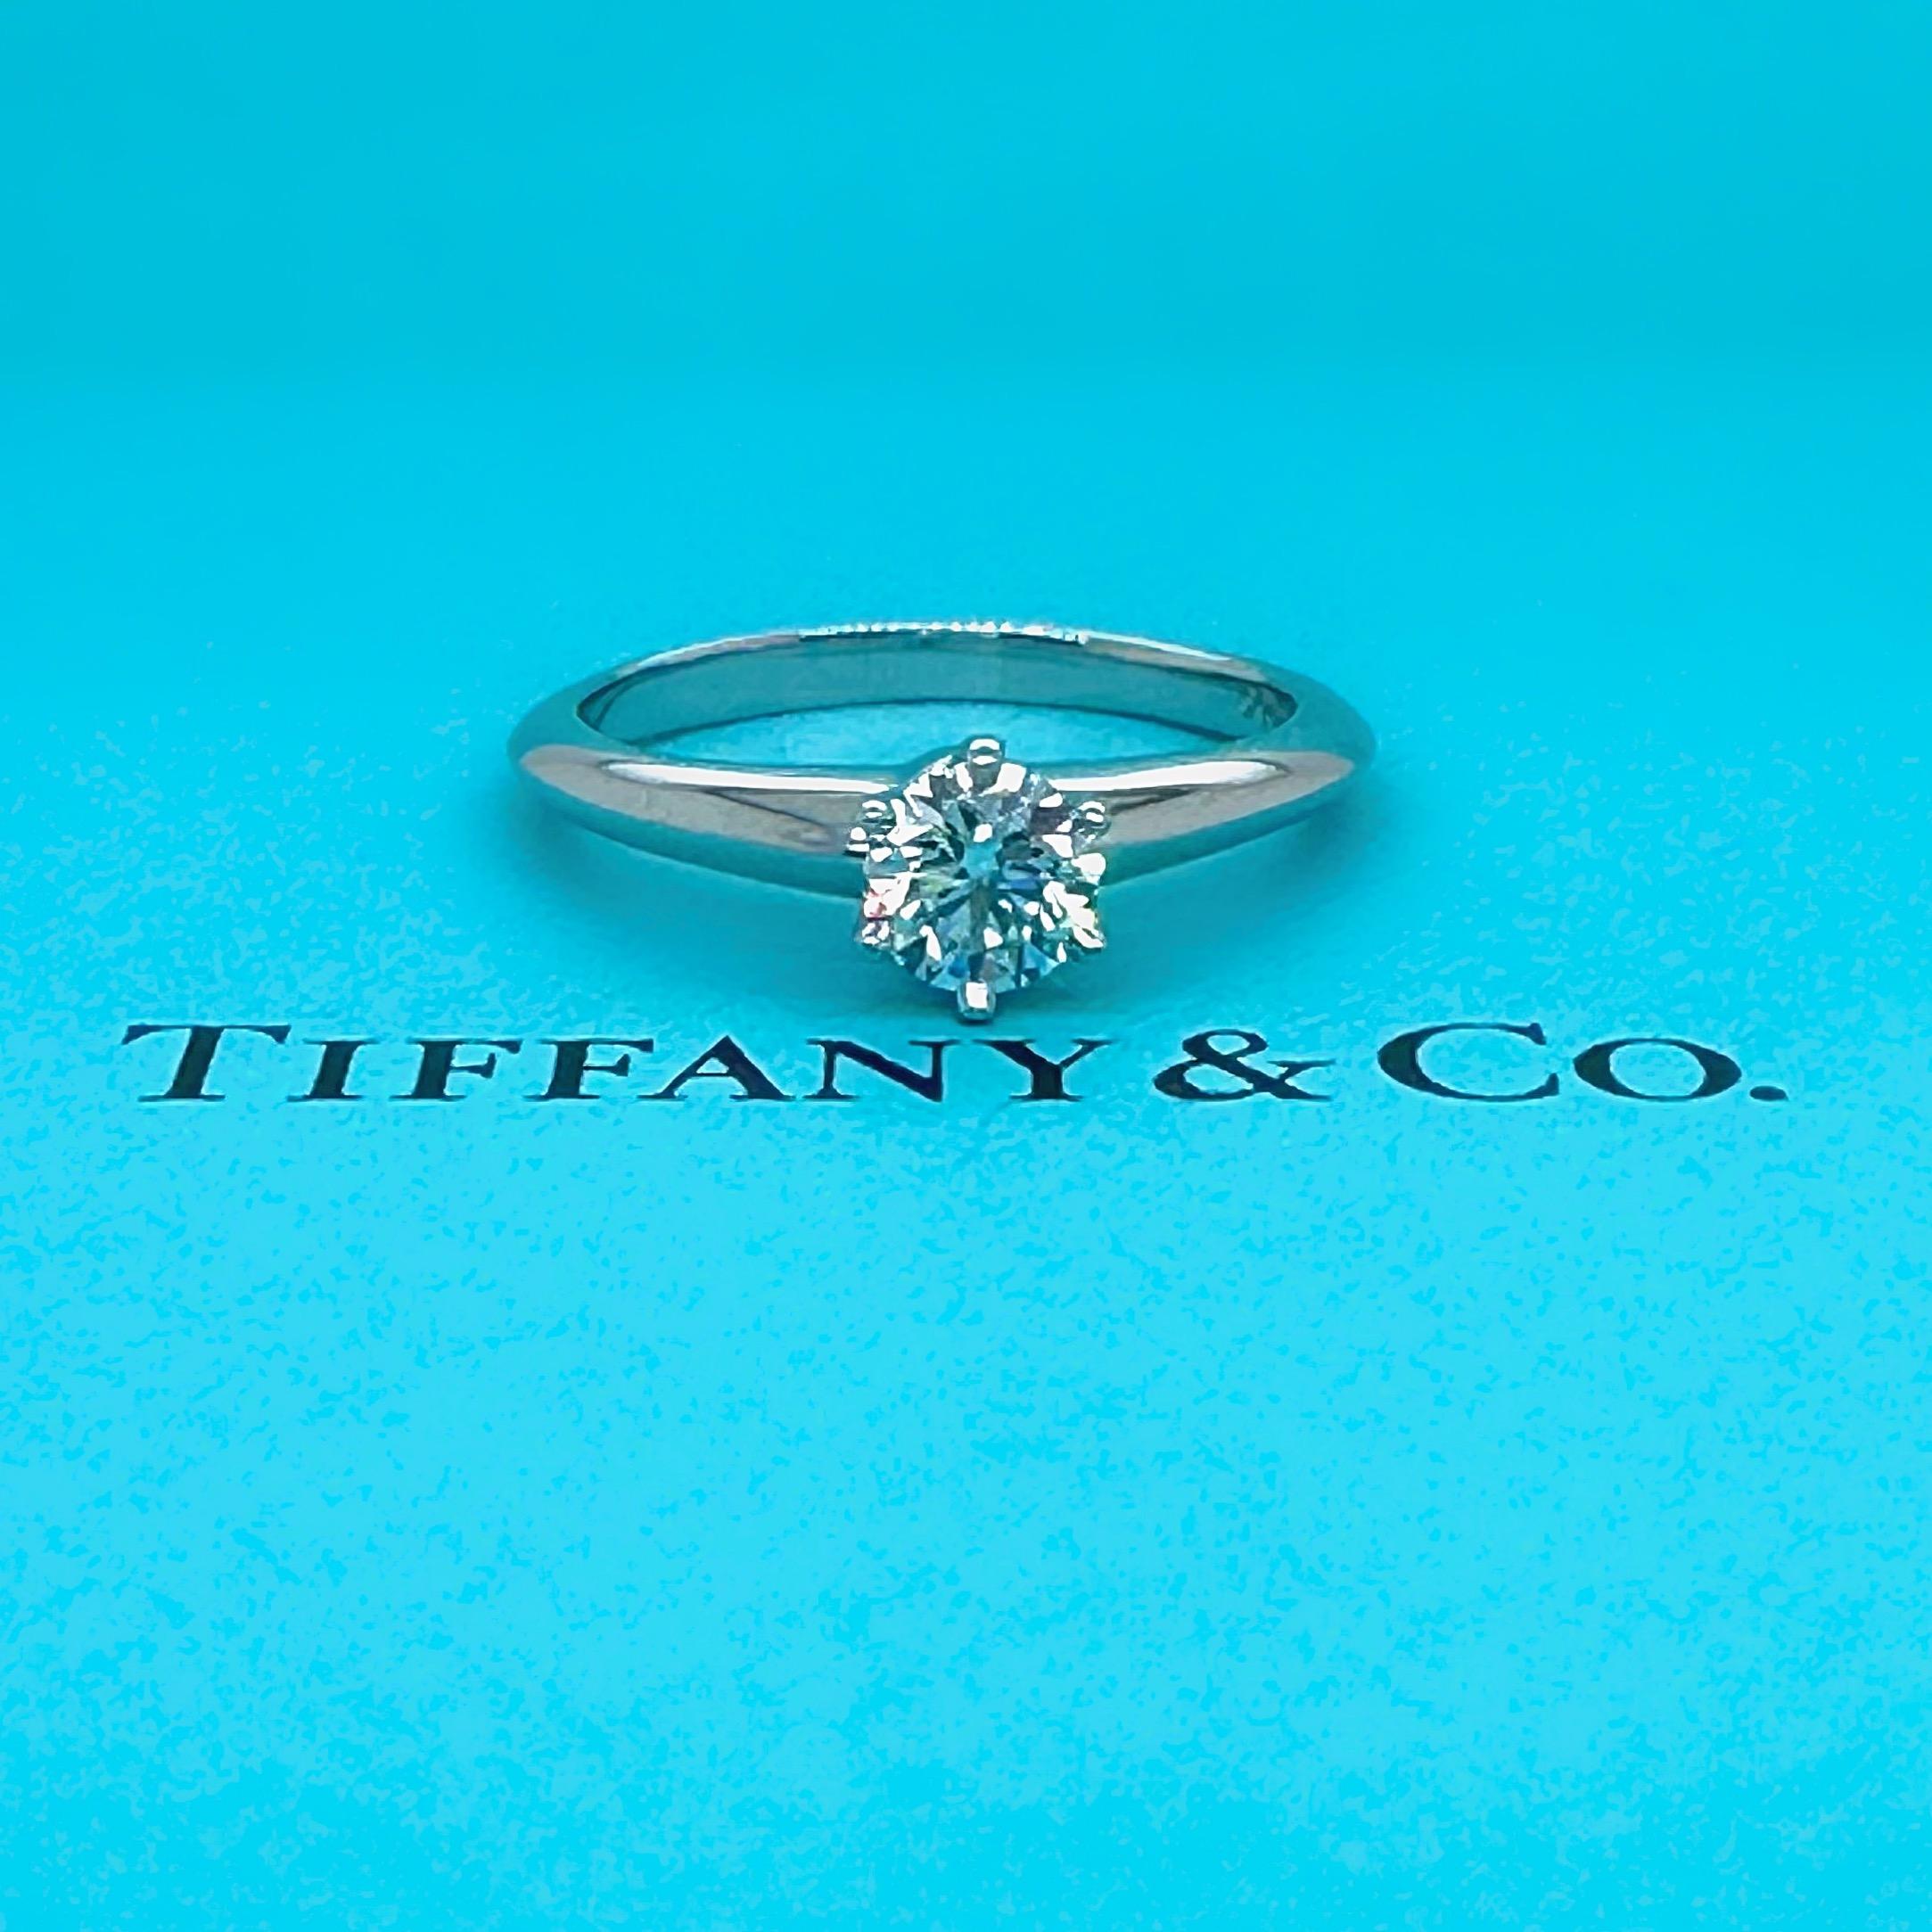 Tiffany & Co. Tiffany Setting Round Diamond Engagement Ring
Style:   6 Prong Tiffany Solitaire
Ref. number:  28262221
Metal:  Platinum PT950
Size:  4.5 sizable
Main Diamond:  Round Brilliant Diamond 0.37 cts
Color & Clarity:  F, VVS1
Hallmark: 